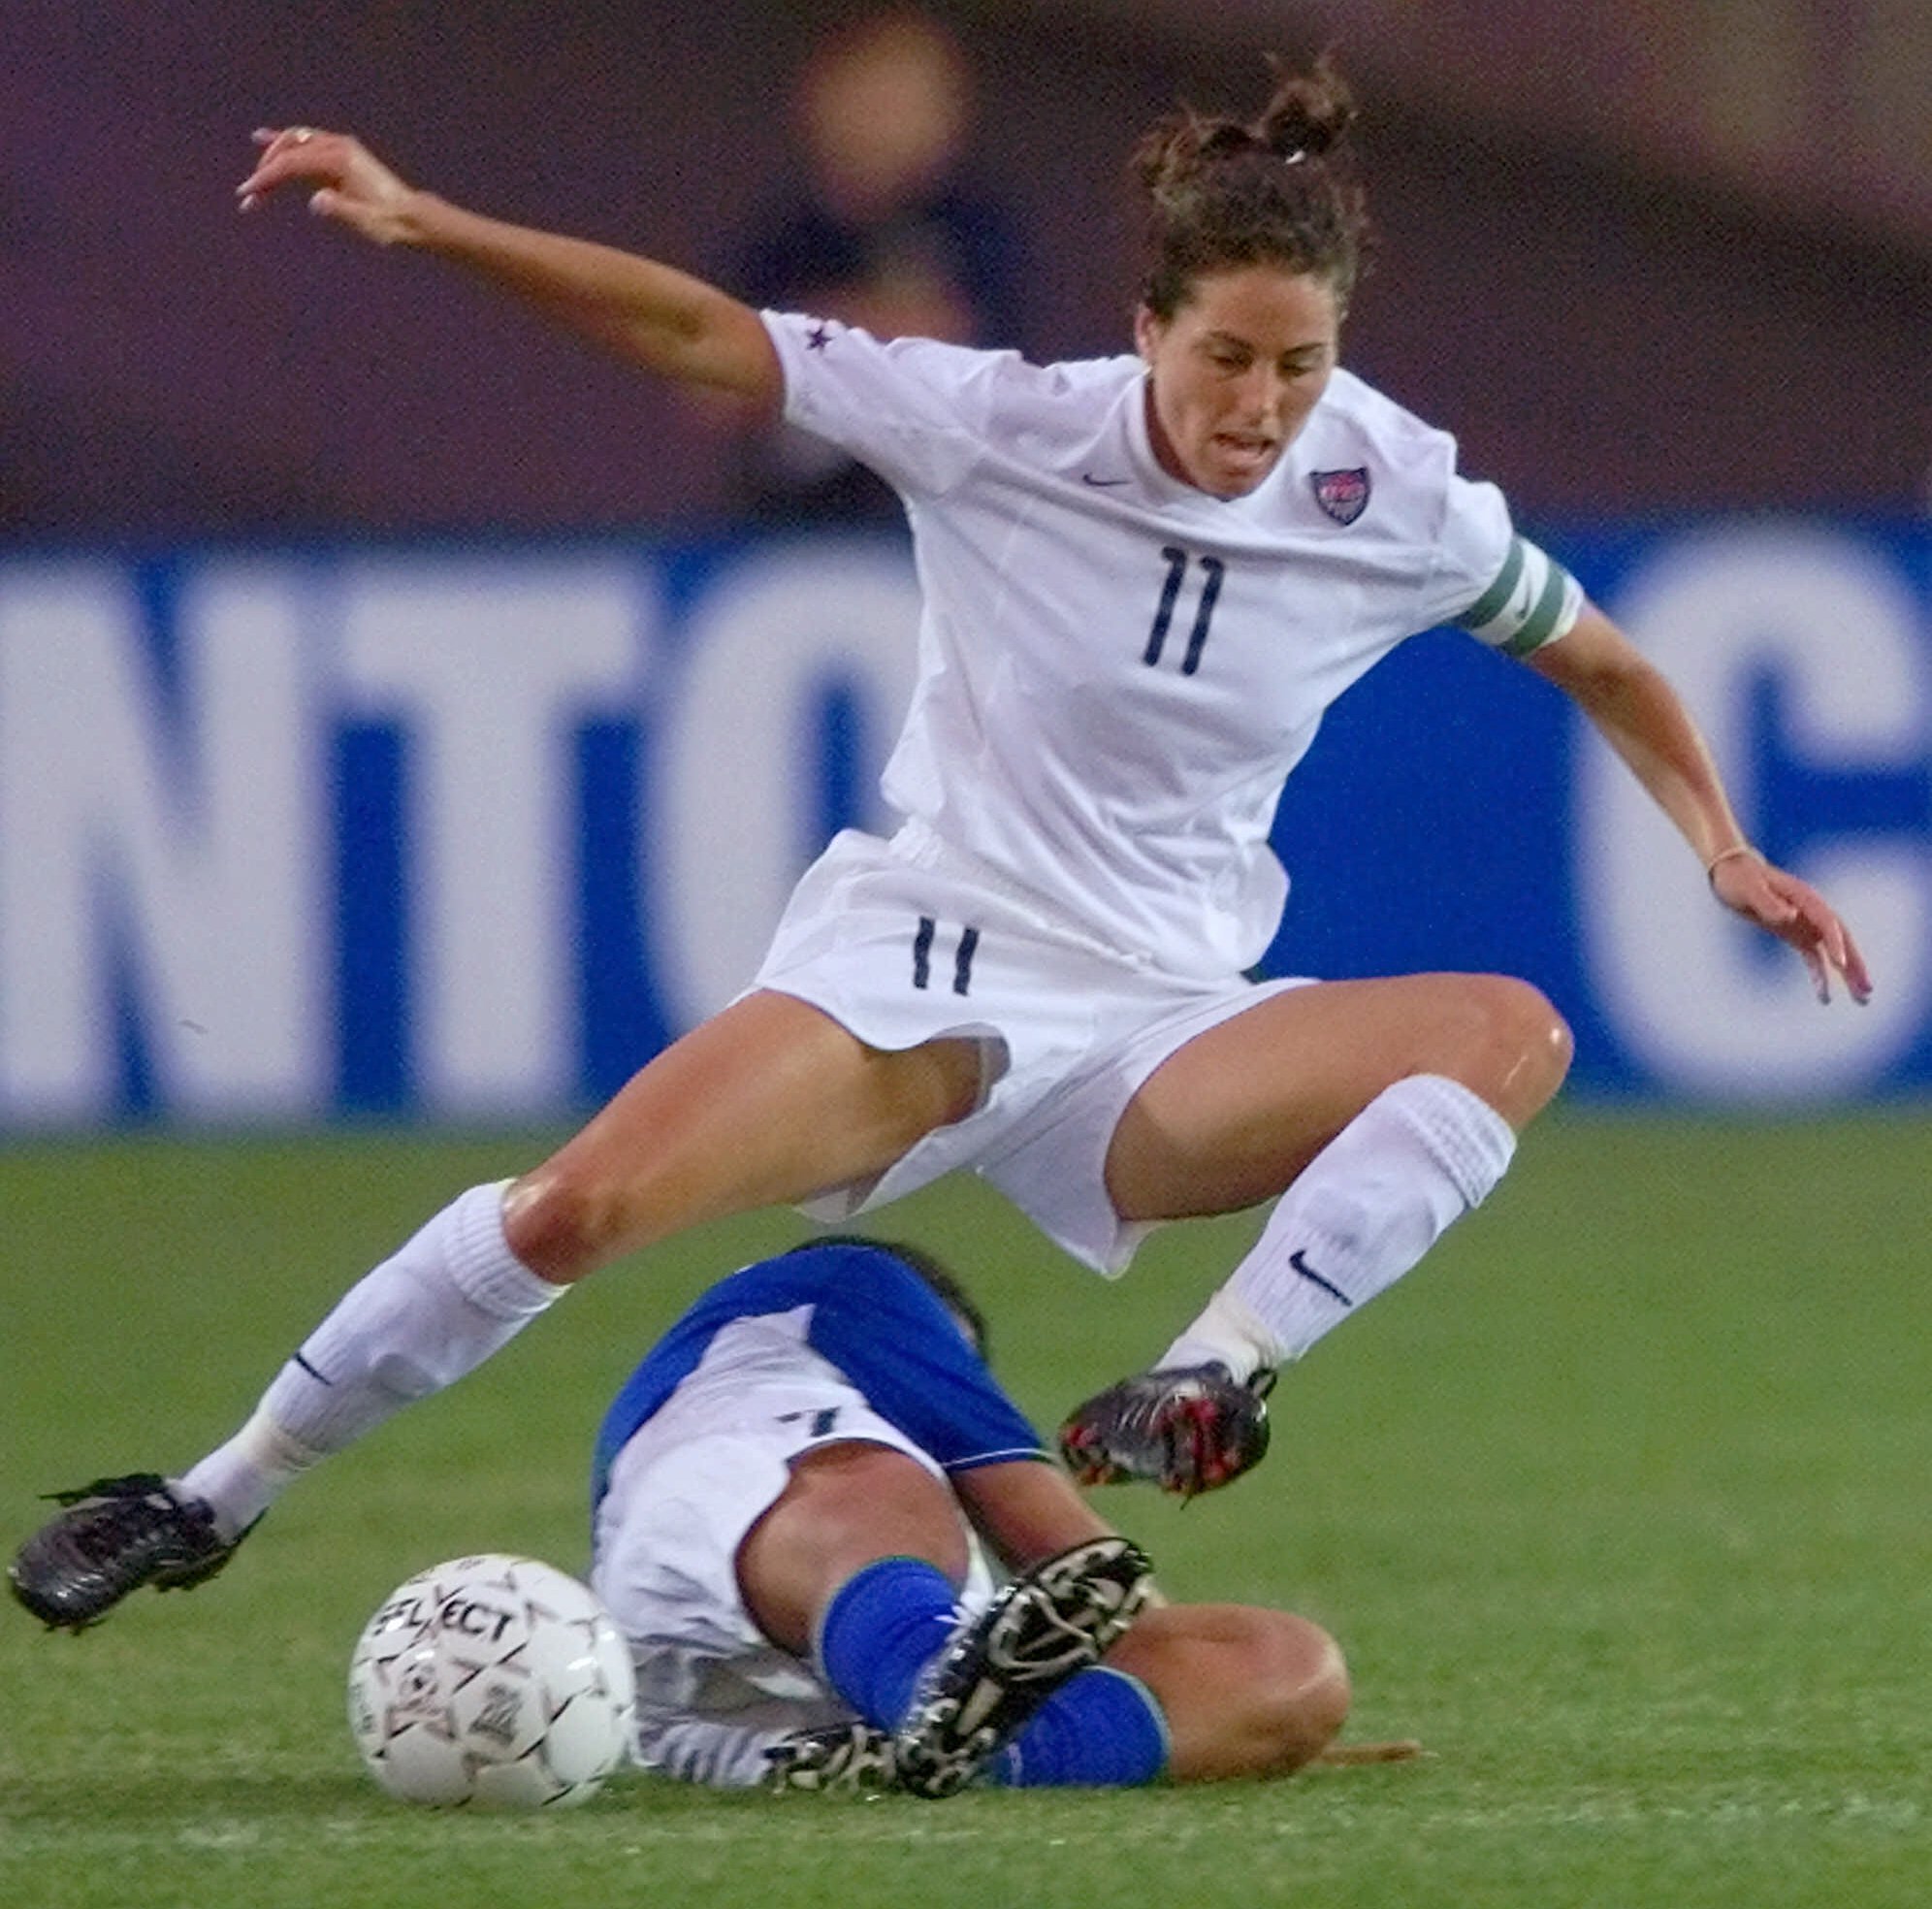 U.S. midfielder Julie Foudy leaps over Brazil's Maria De Souza Diaz to control the ball during a 2000 Women's Gold Cup match in Foxboro, Massachusetts.